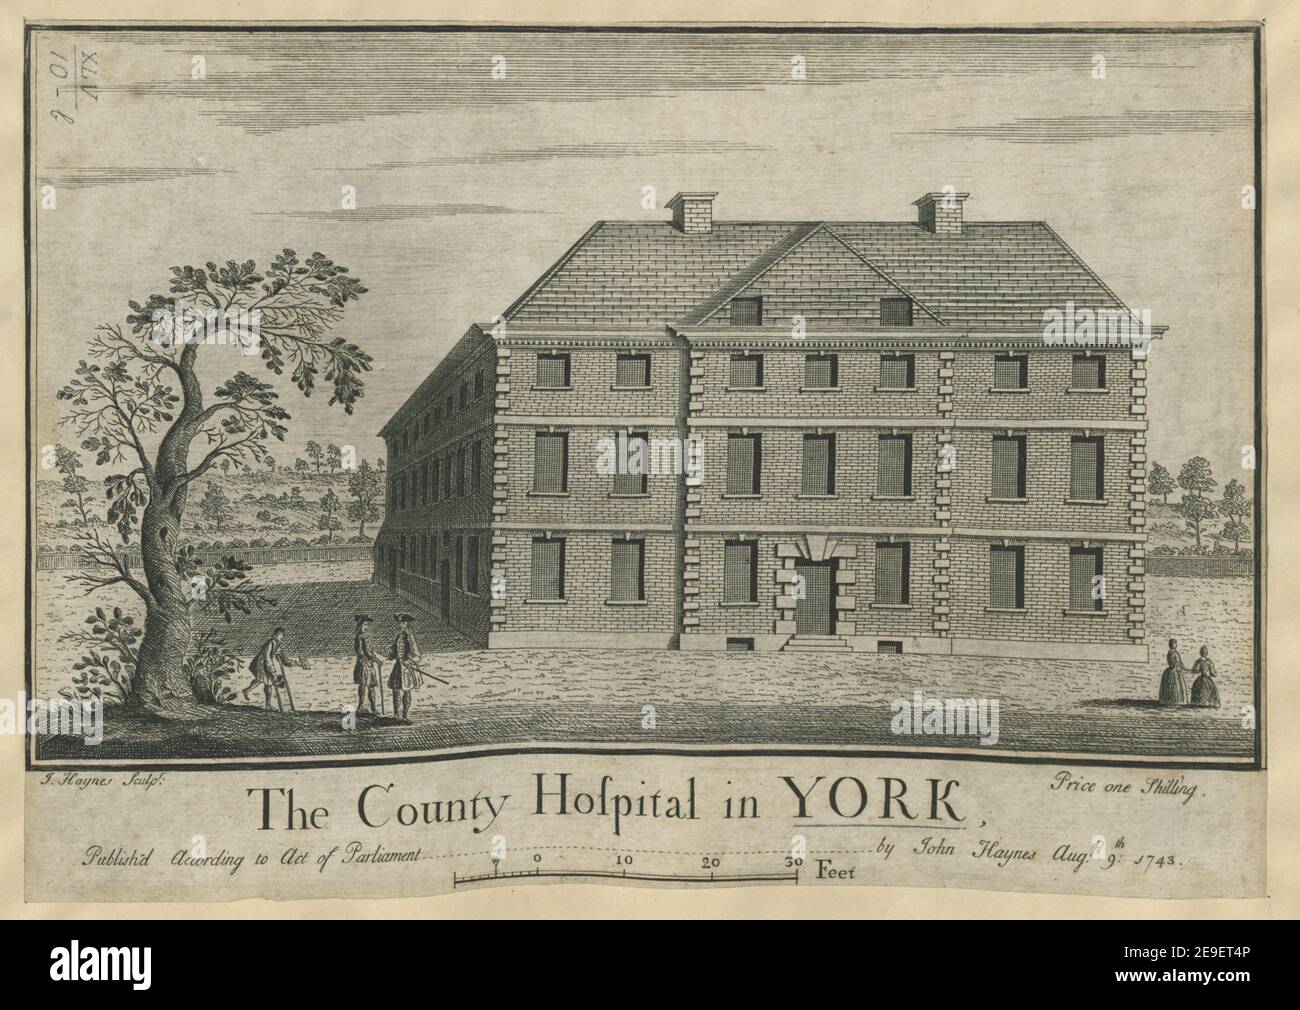 The County Hospital in York.  Author  Haynes, John 45.10.b. Place of publication: [York] Publisher: [J. Haynes]., Date of publication: [1743.]  Item type: 1 print Medium: etching and engraving Dimensions: platemark 21.0 x 29.6 cm  Former owner: George III, King of Great Britain, 1738-1820 Stock Photo